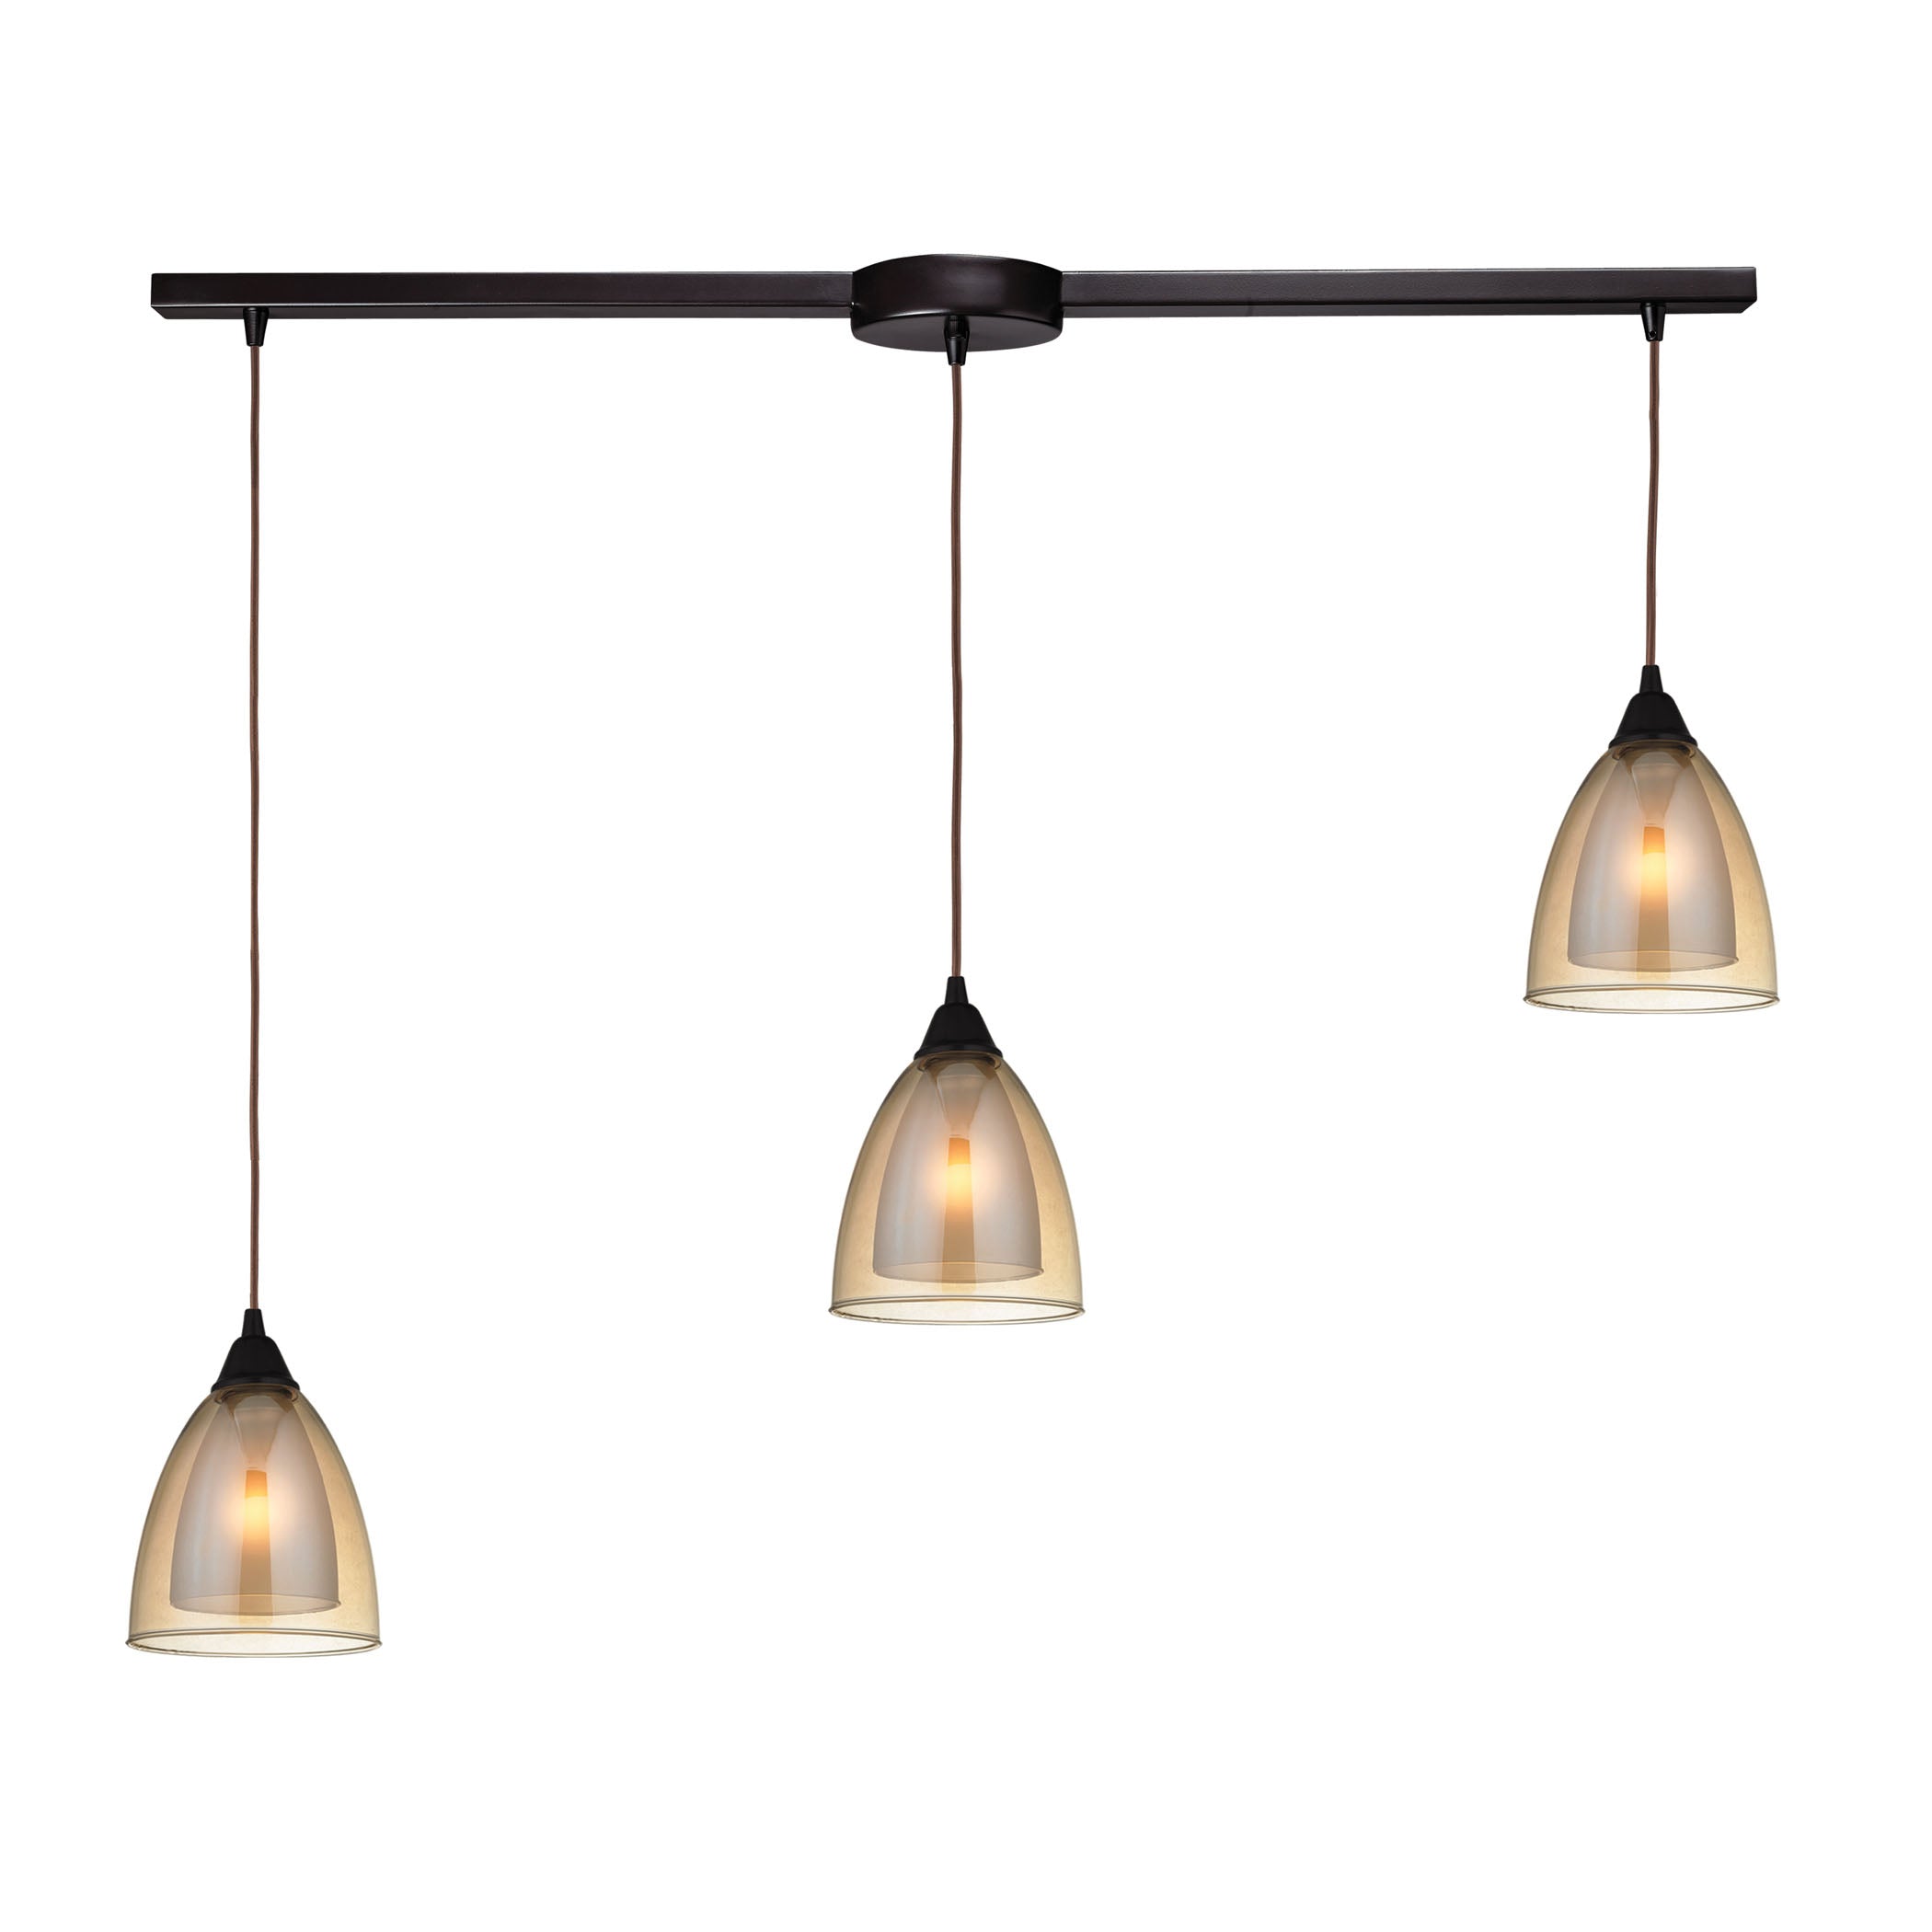 ELK Lighting 10474/3L Layers 3-Light Linear Pendant Fixture in Oil Rubbed Bronze with Amber Teak Glass